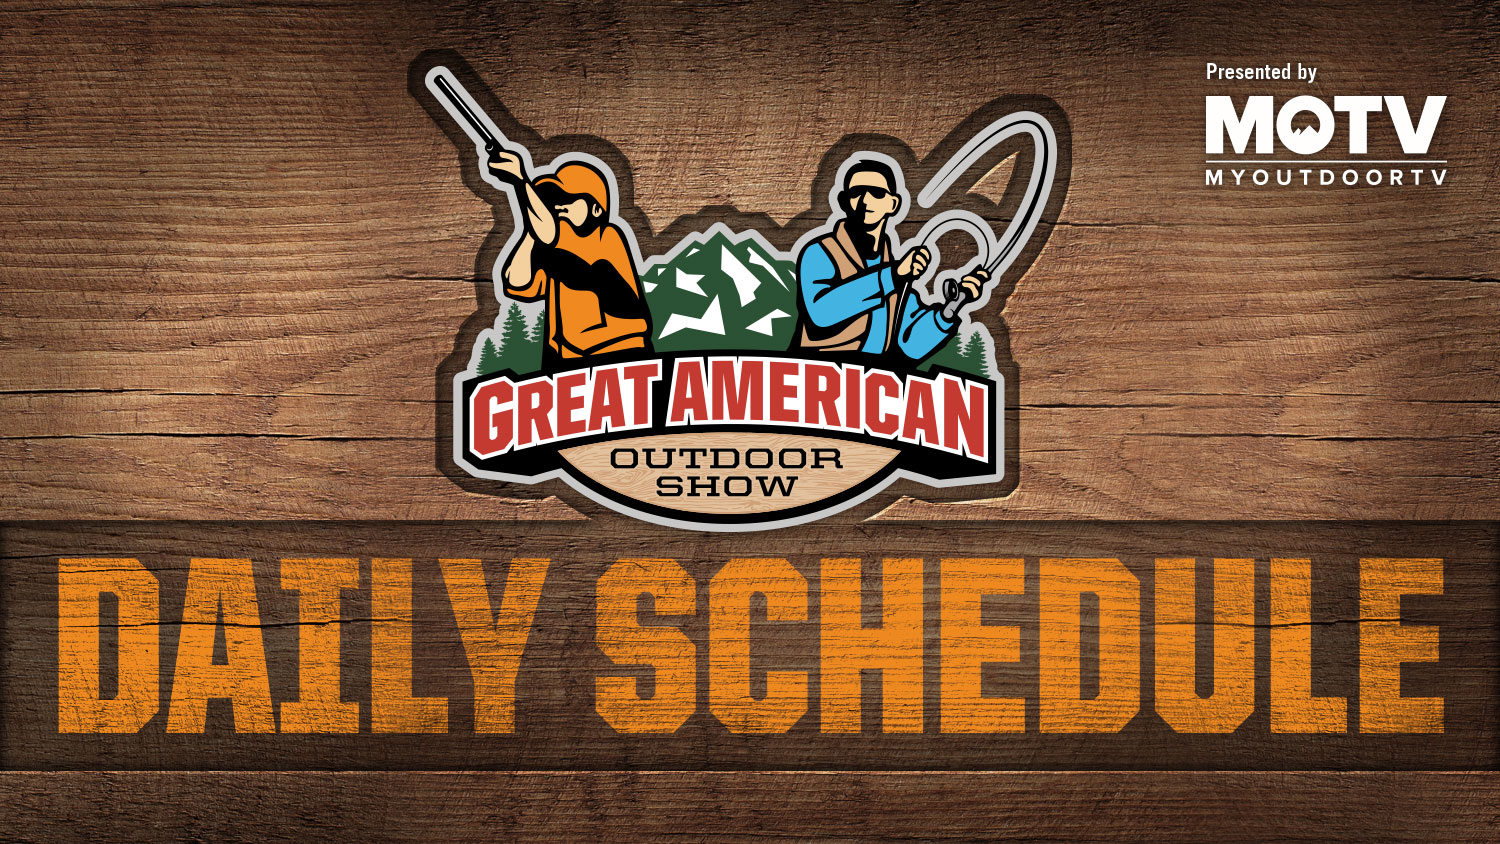 Great American Outdoor Show: Day 2 Schedule 